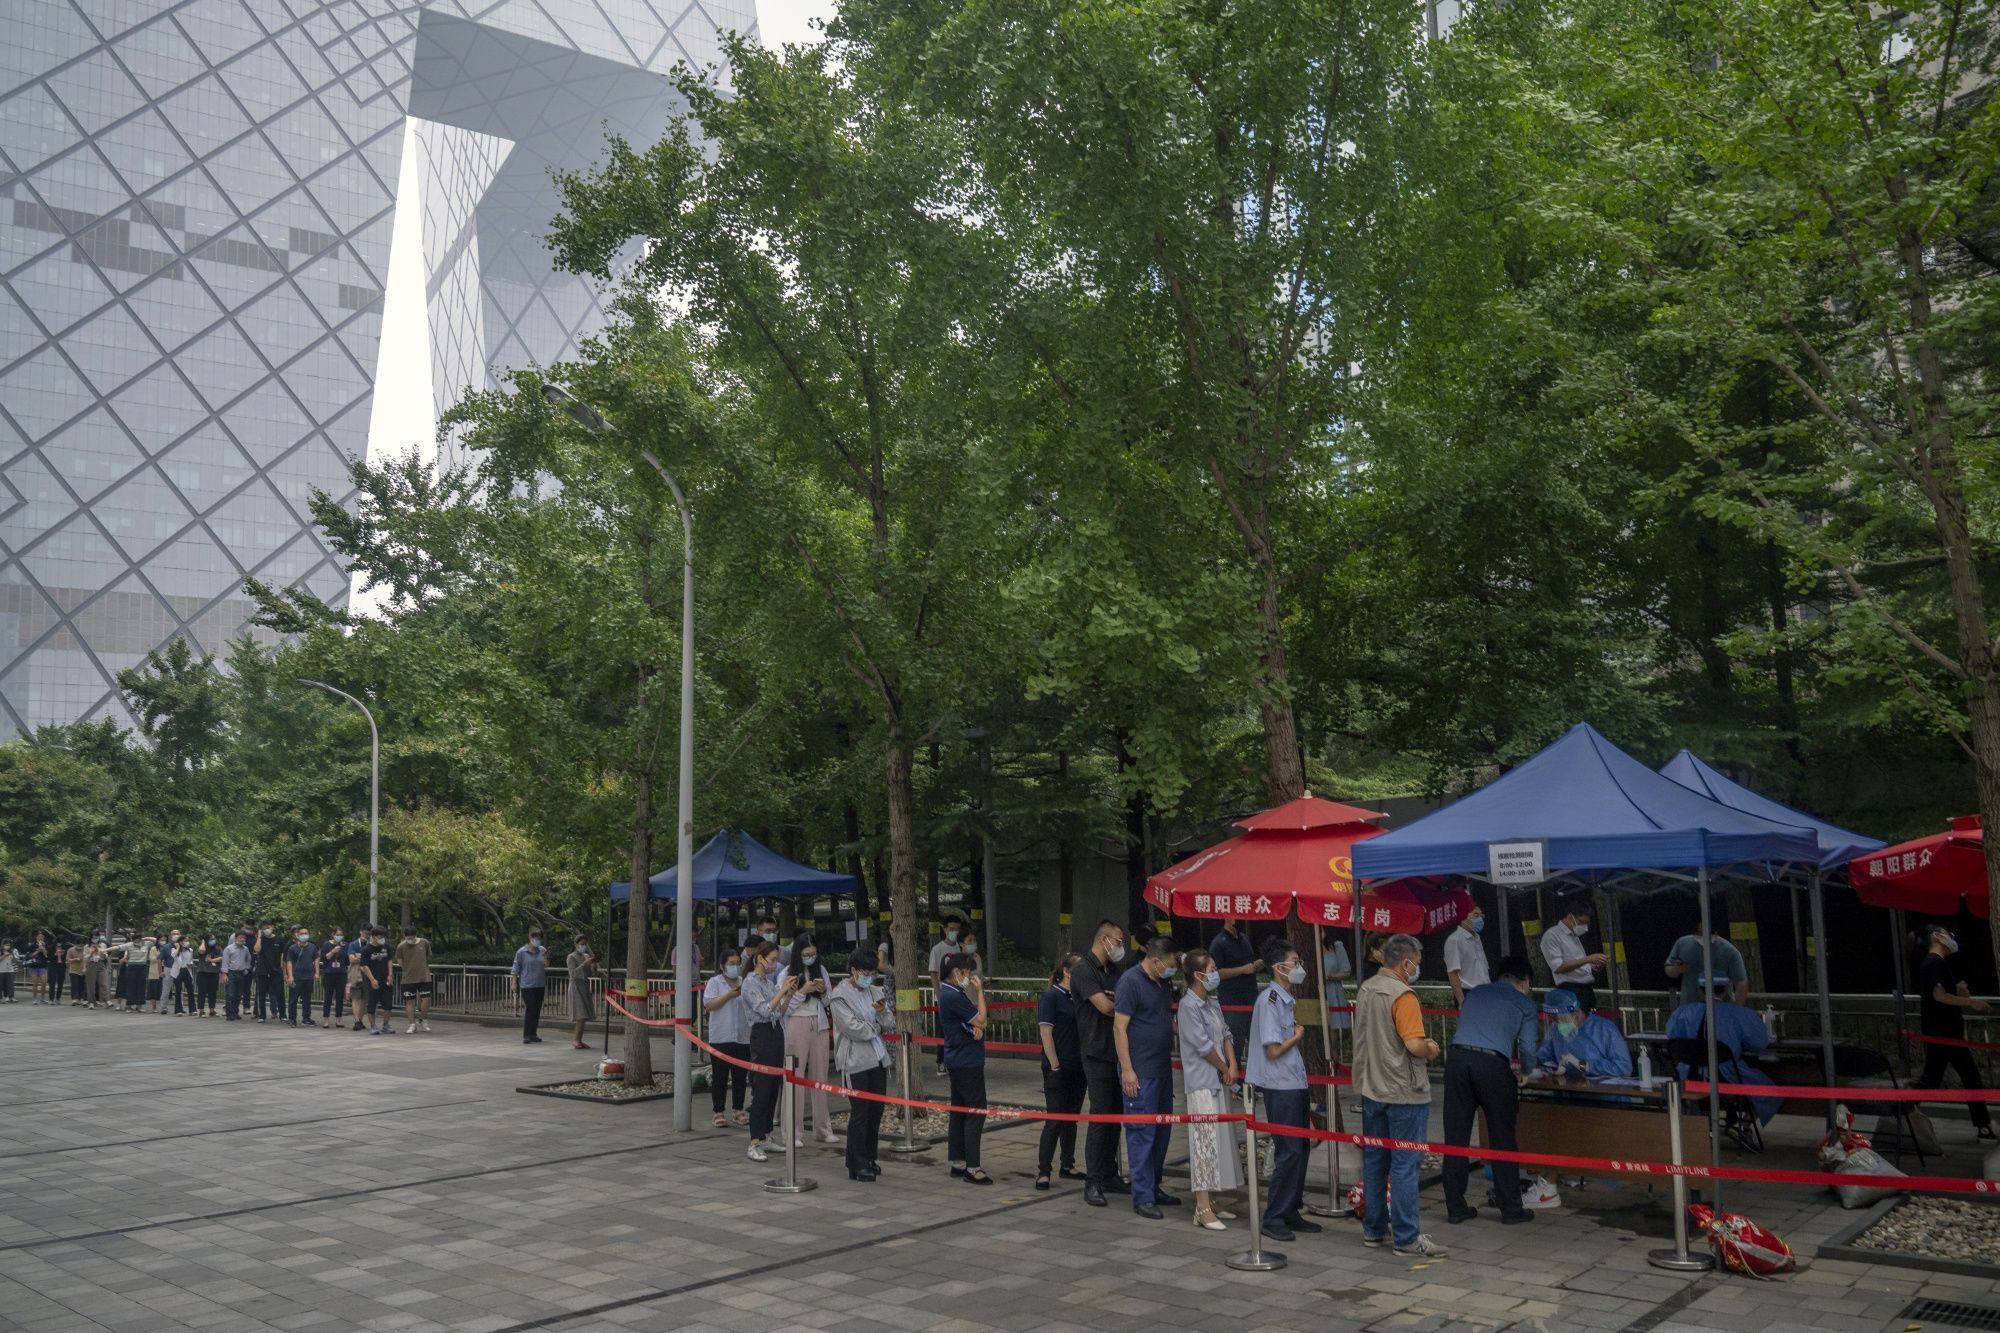 Residents queue at a Covid-19 testing booth in Beijing on July 27. China is sticking to its “dynamic zero-Covid” strategy of lockdowns, movement restrictions and mass testing. Photo: Bloomberg